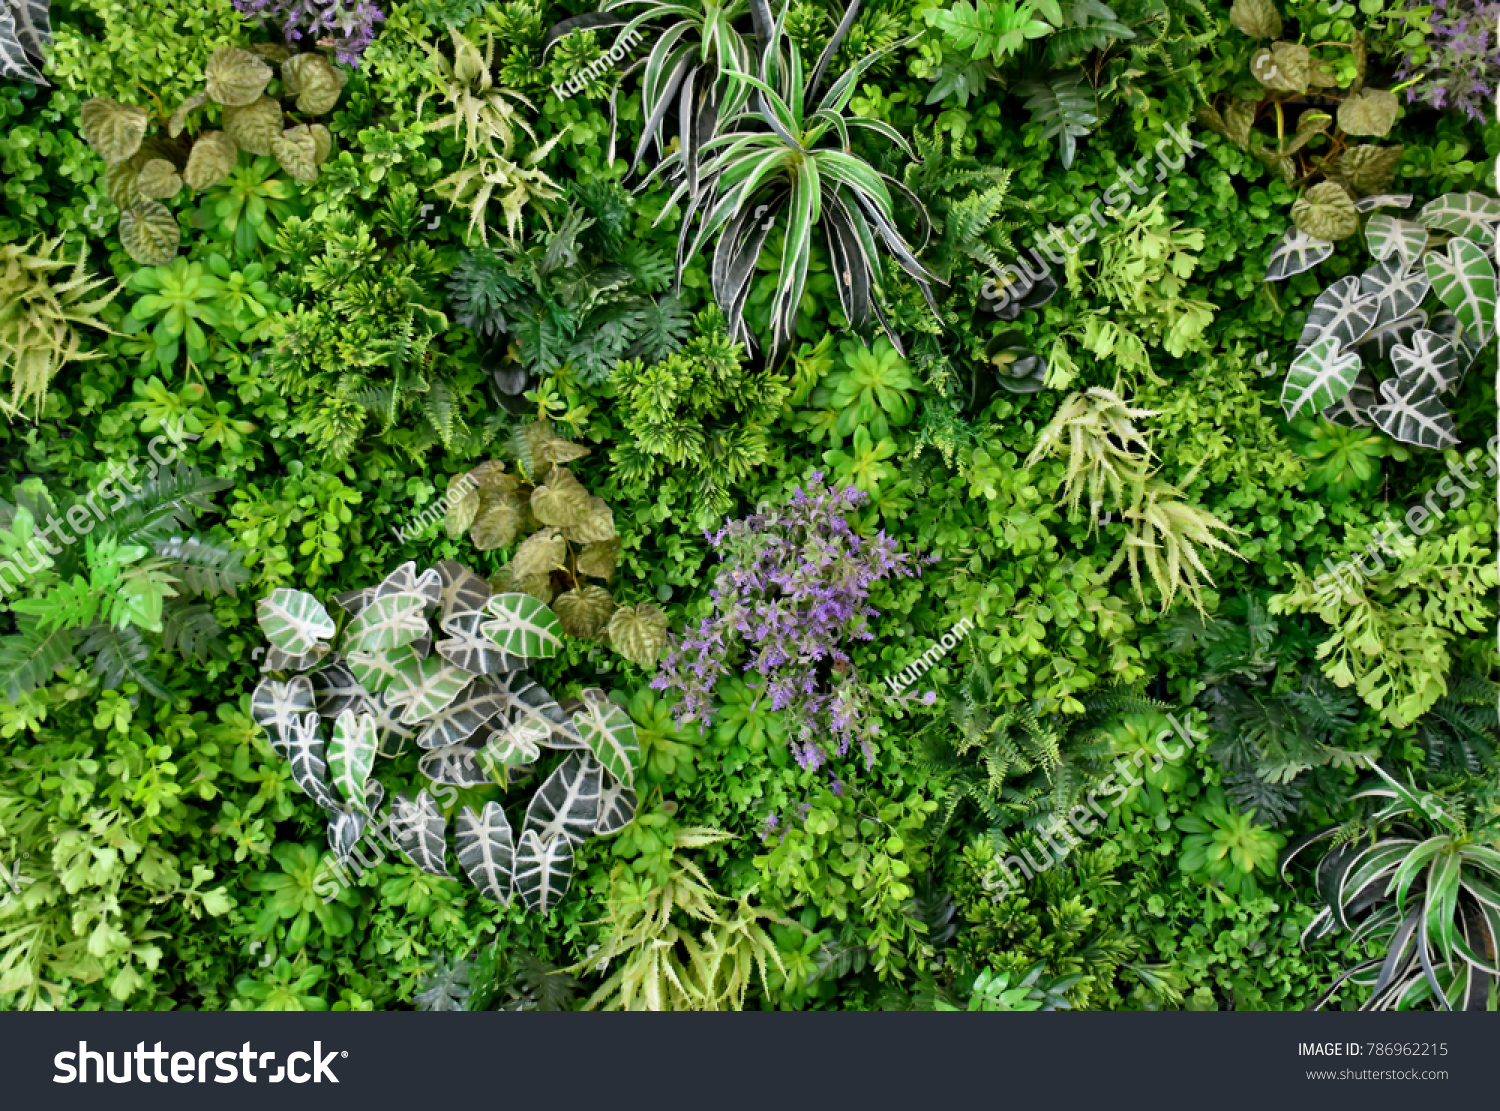 wall is full of Vegetation green color. #786962215